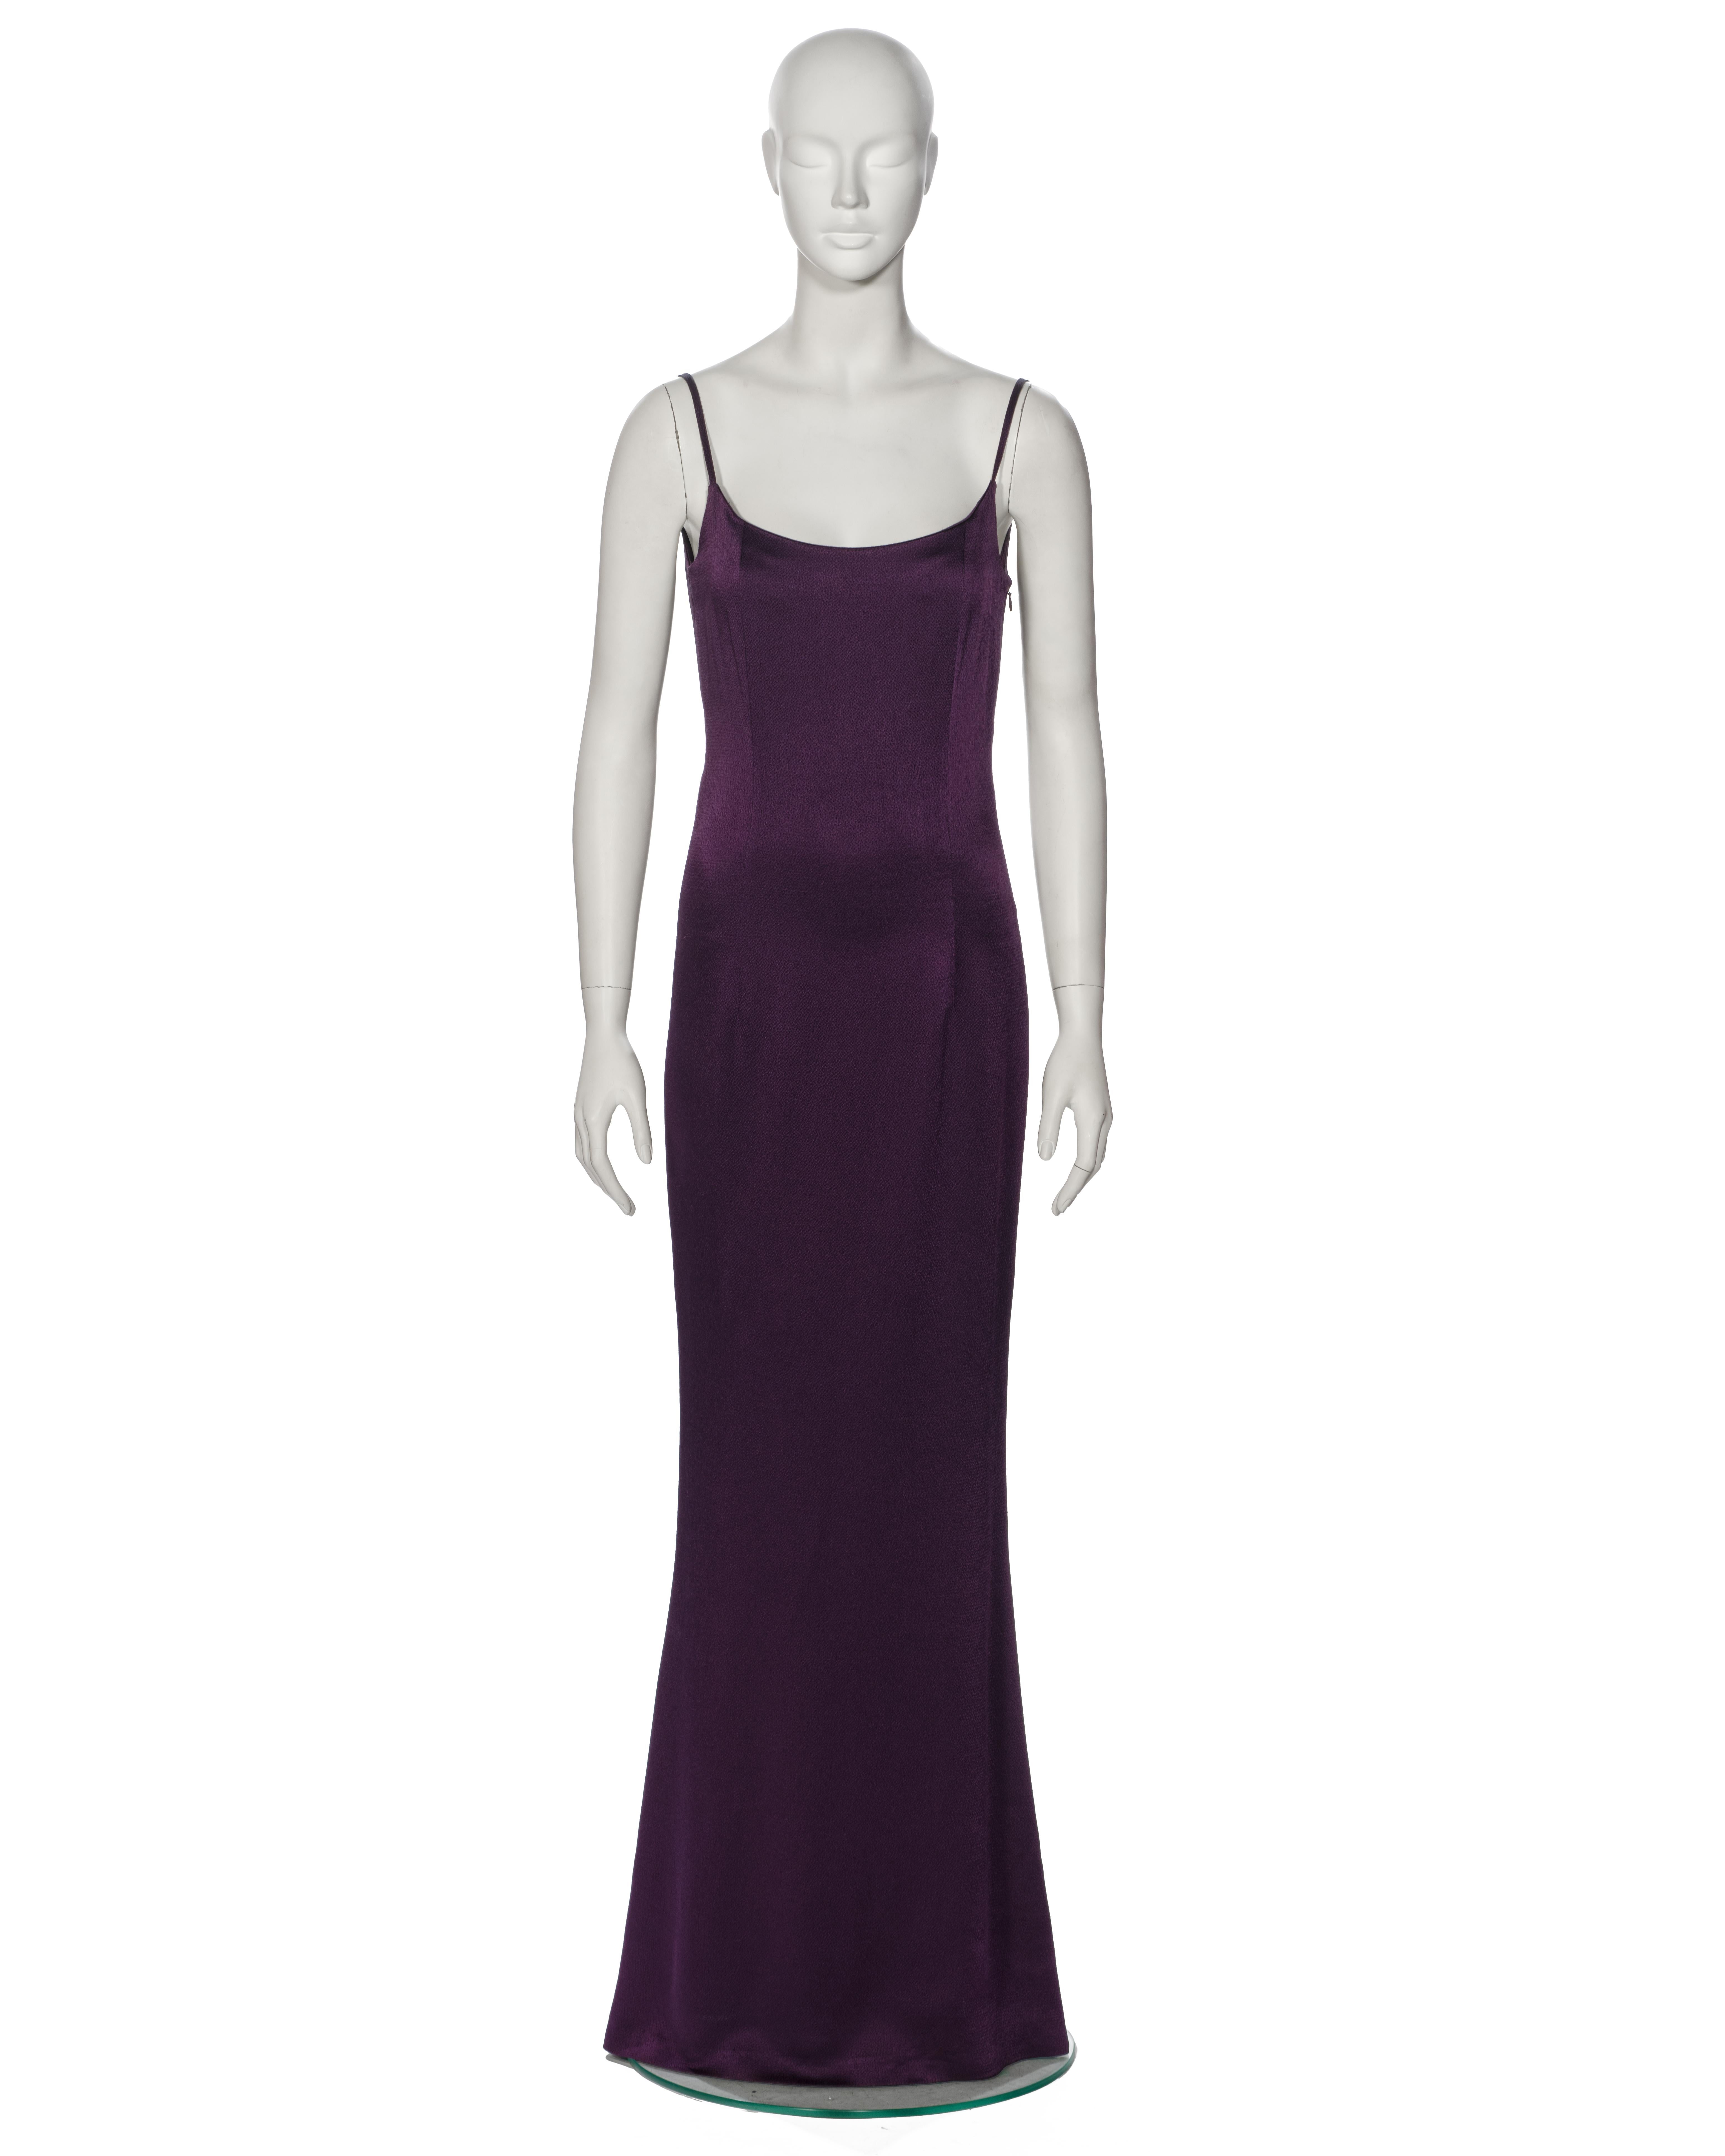 Women's Christian Dior by John Galliano Purple Satin Evening Dress and Shawl, ss 1998 For Sale